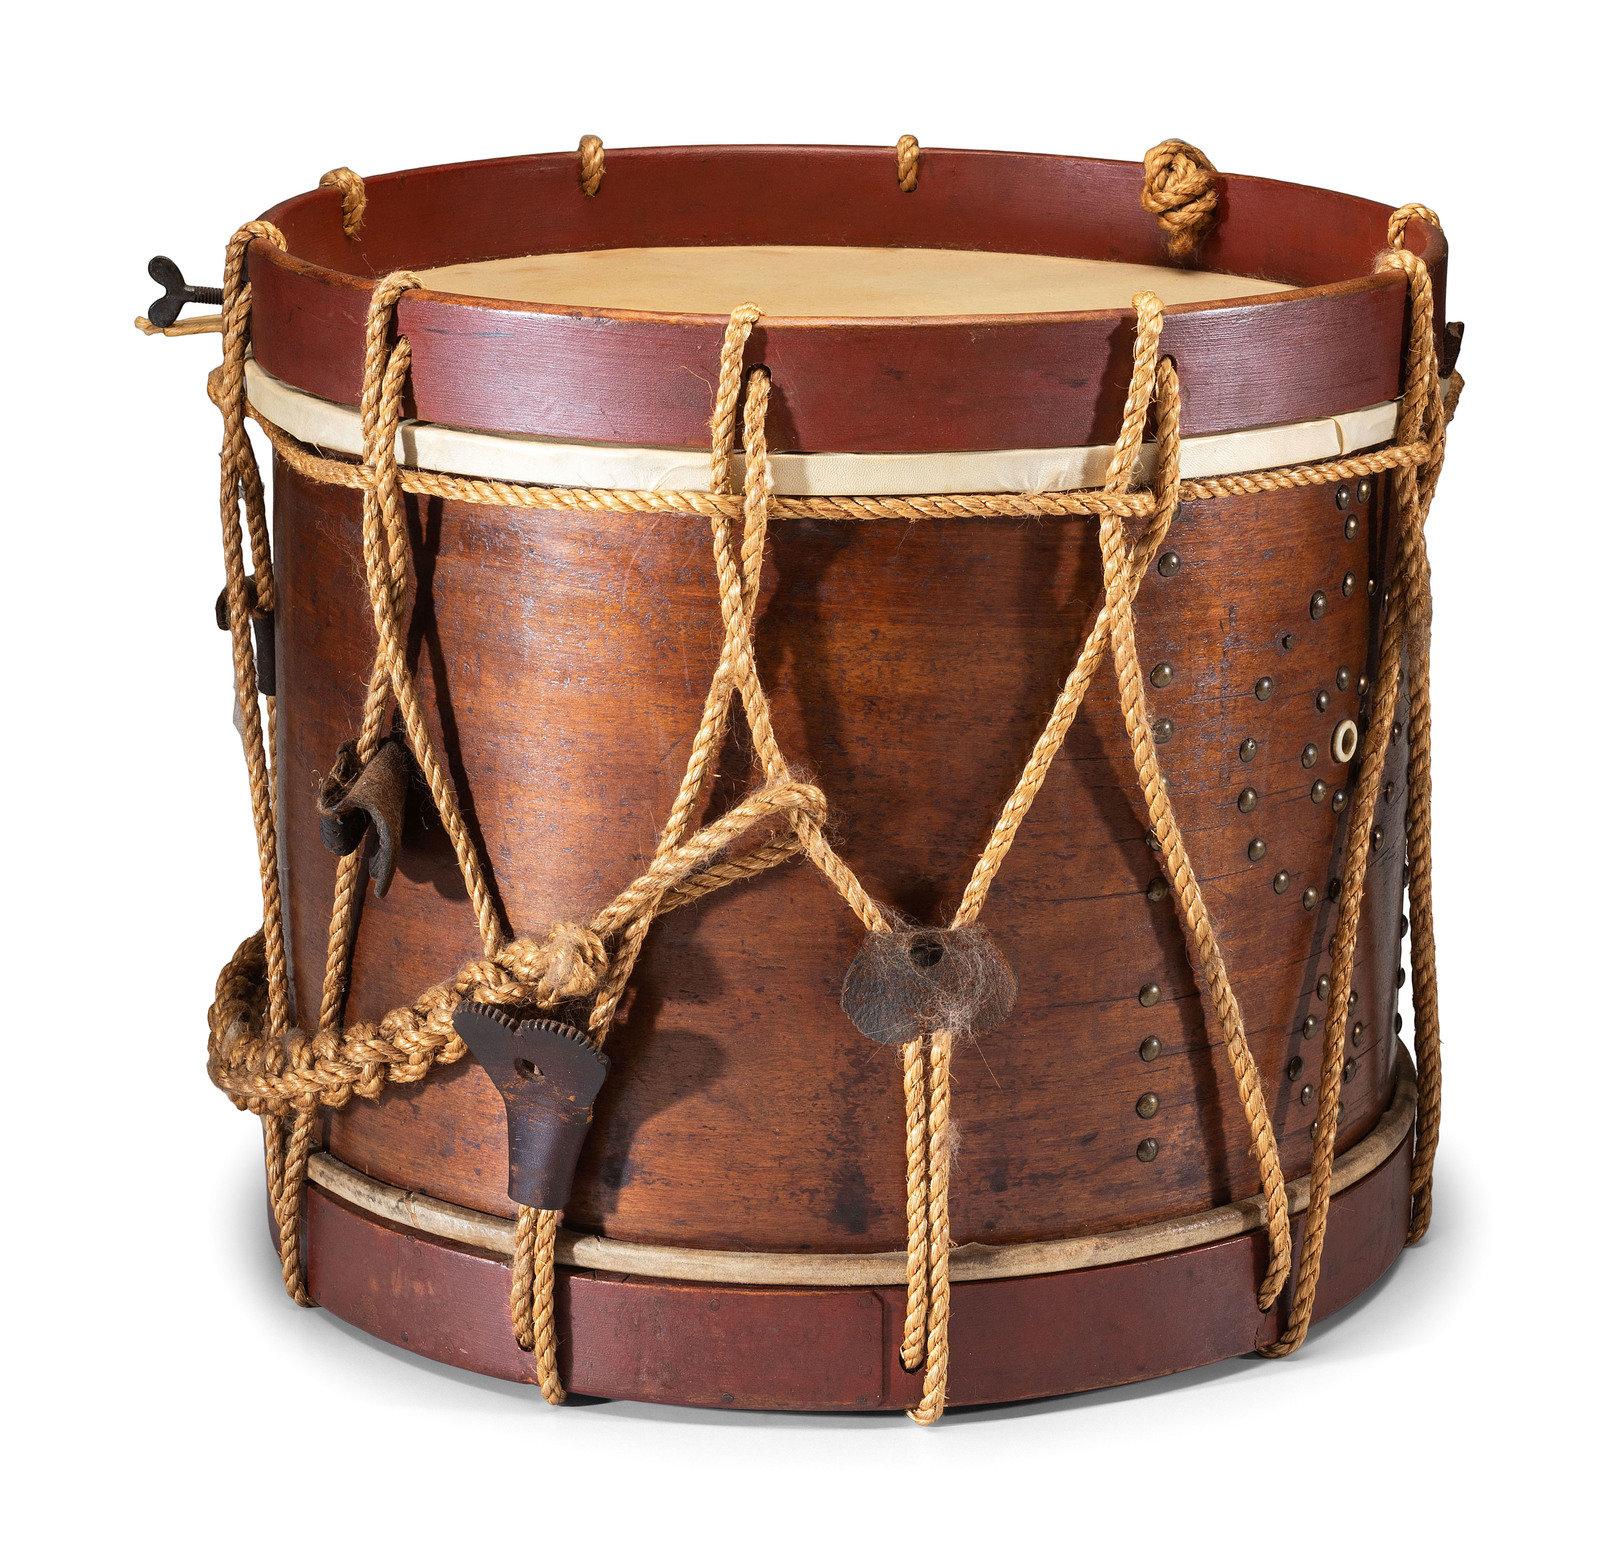 Presented is an original Civil War-era side drum with a pair of wooden drumsticks. This is a rope tension drum with a wooden body, ropes, and leather tabs. An iron tack pattern surrounds the drum hole. The drum's hoops are painted a deep red. The